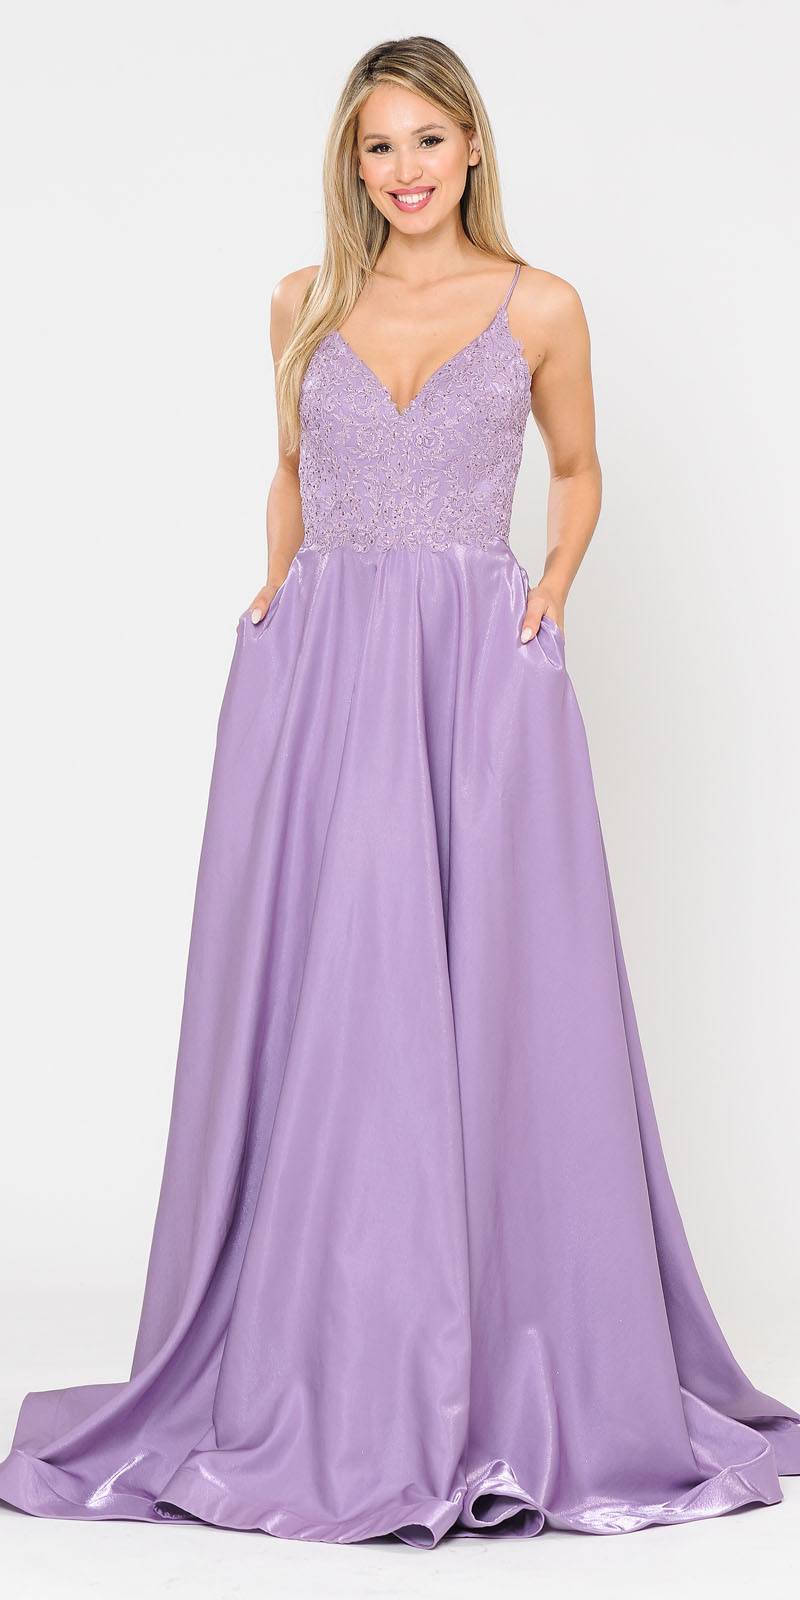 Lace-Up Back Lavender Long Prom Dress with Pockets